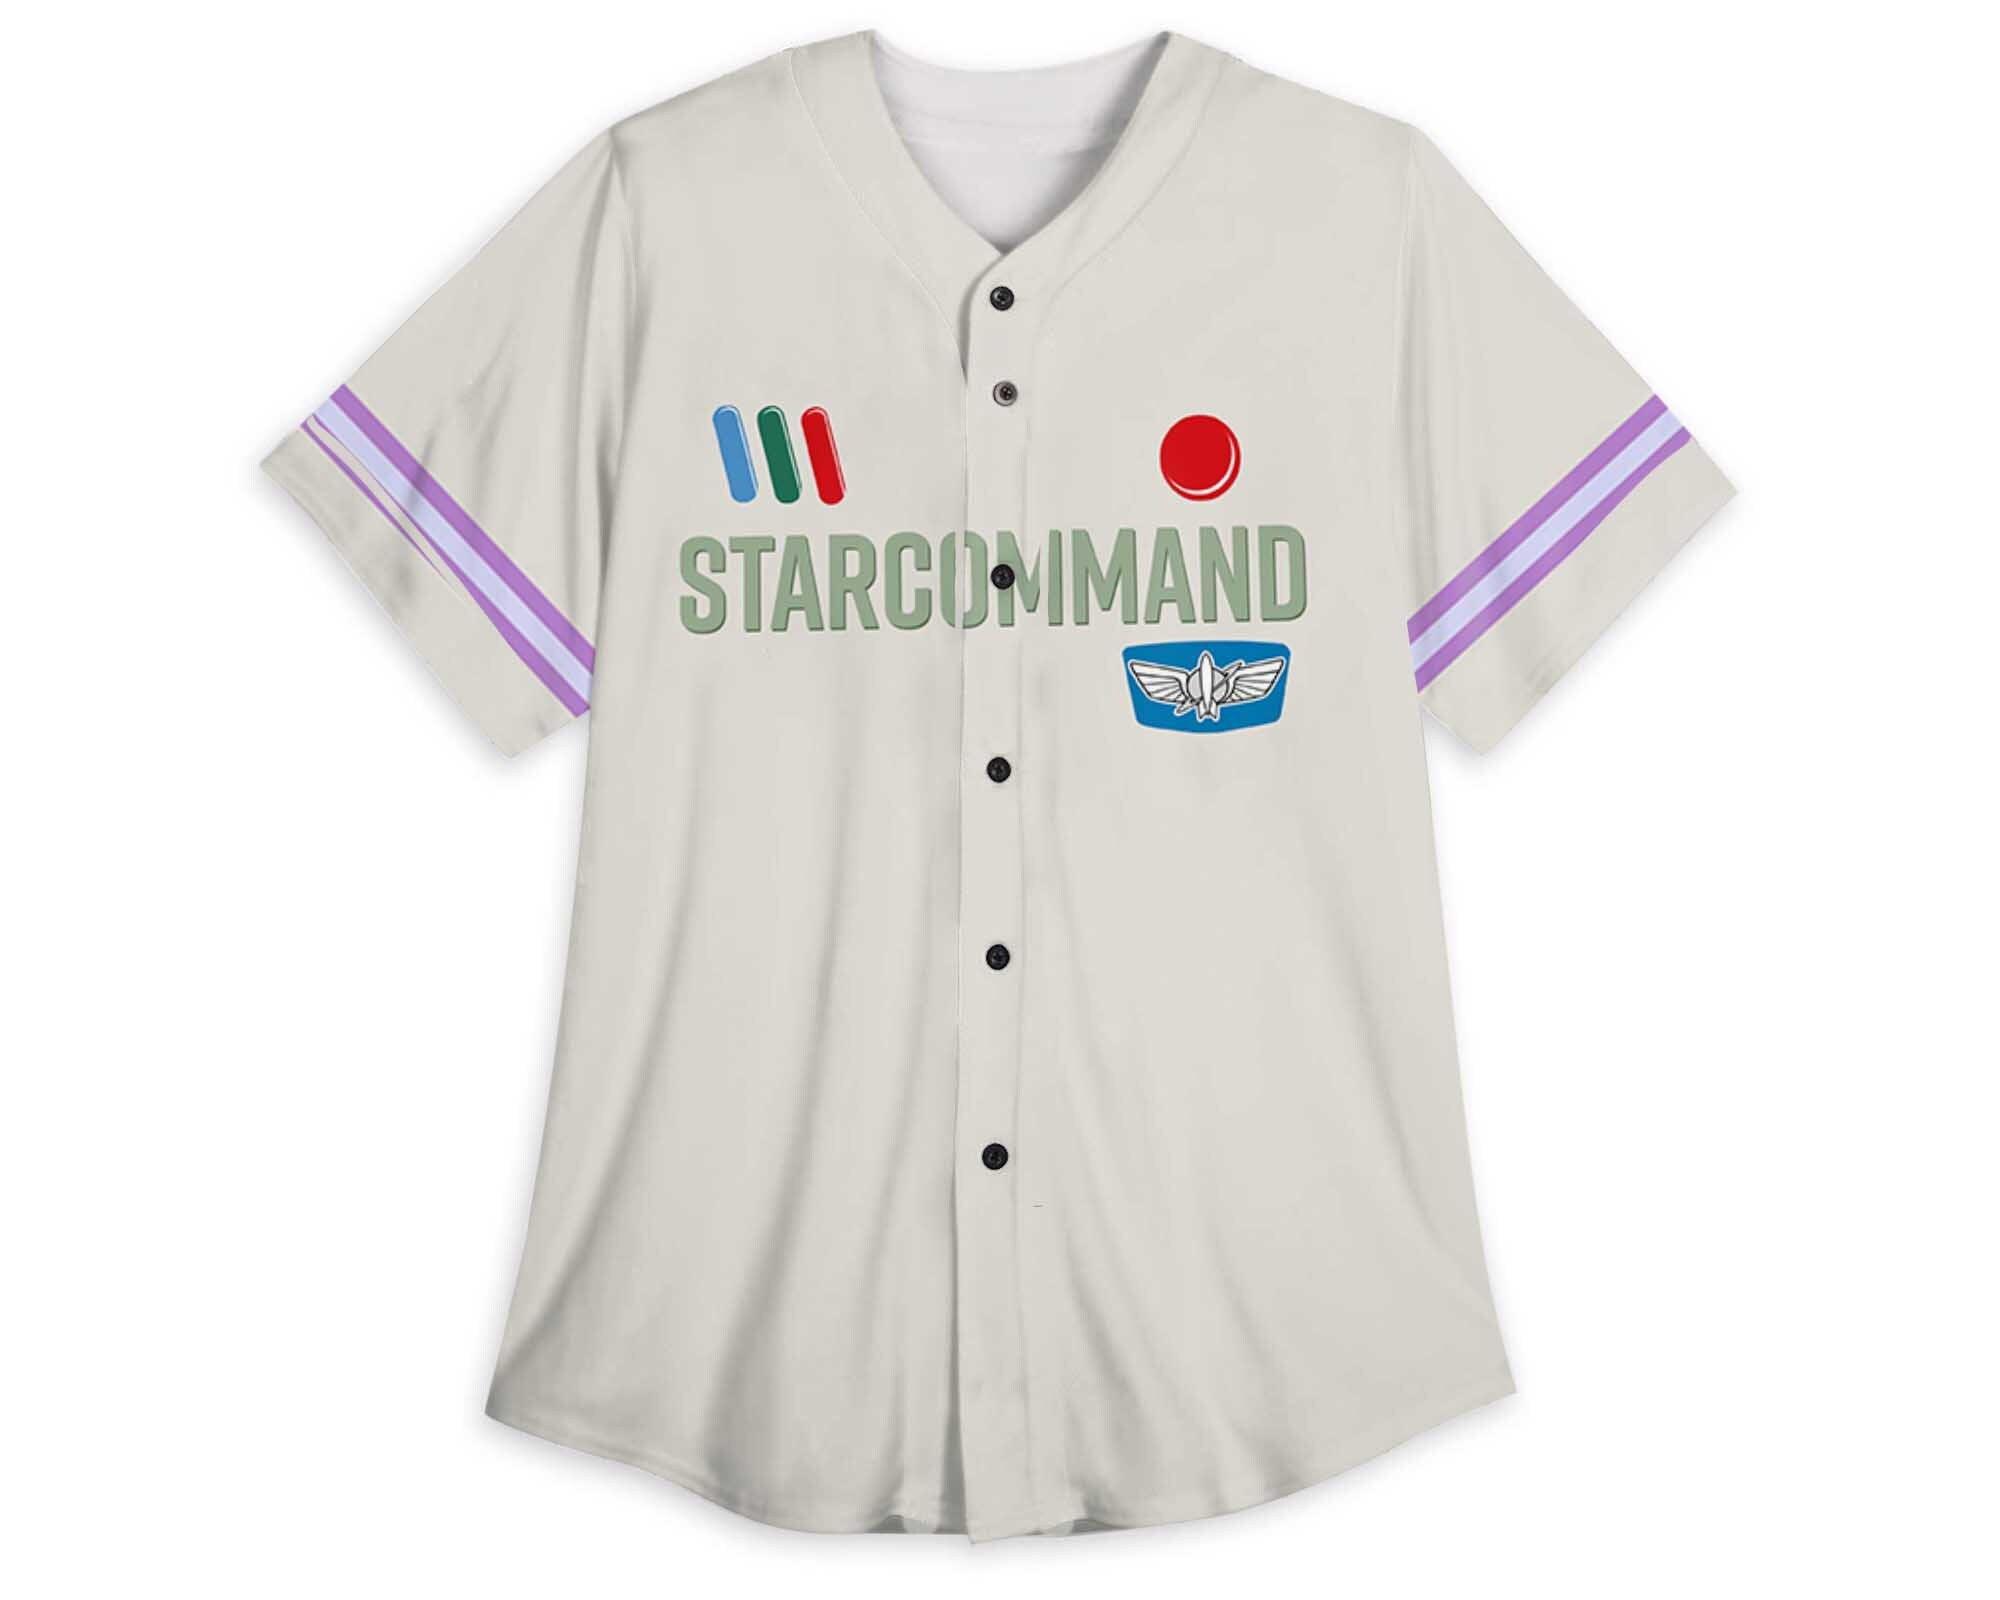 Discover Our Universe Disney Toy Story Buzz Lightyear Star Command Baseball Jersey Shirt